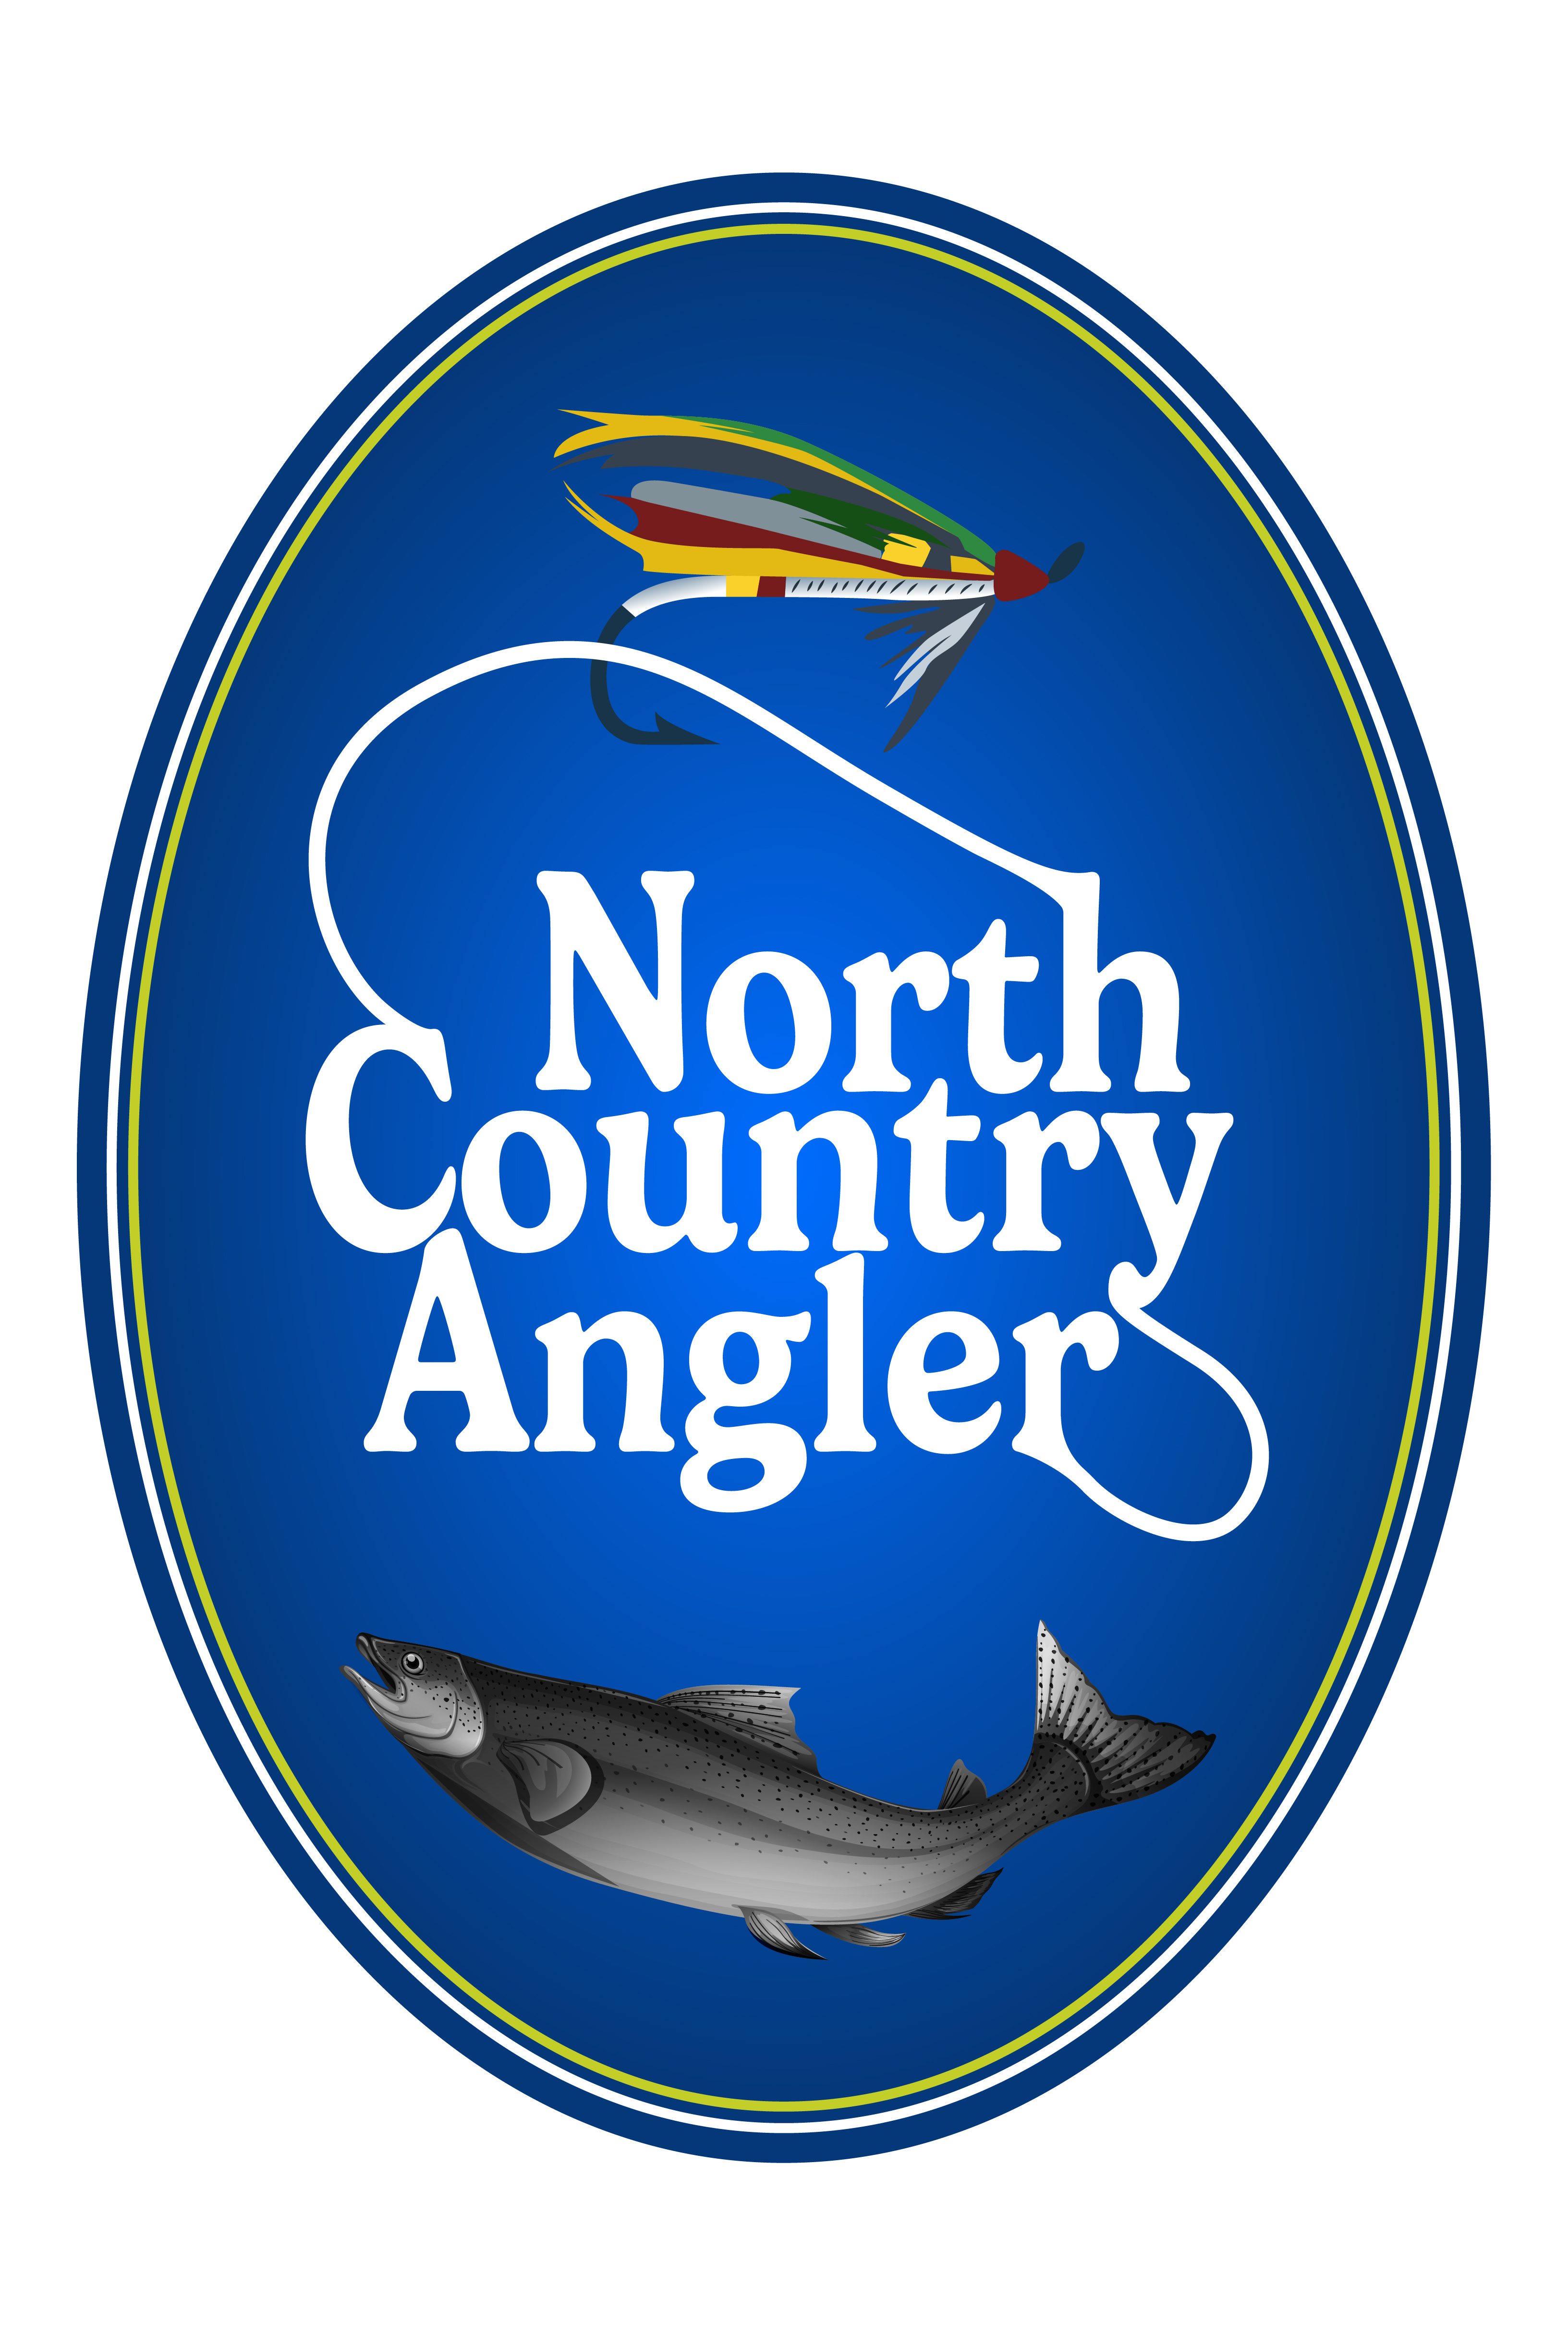 North Country Angler Fly Shop - North Conway, New Hampshire Fly Fishing Store